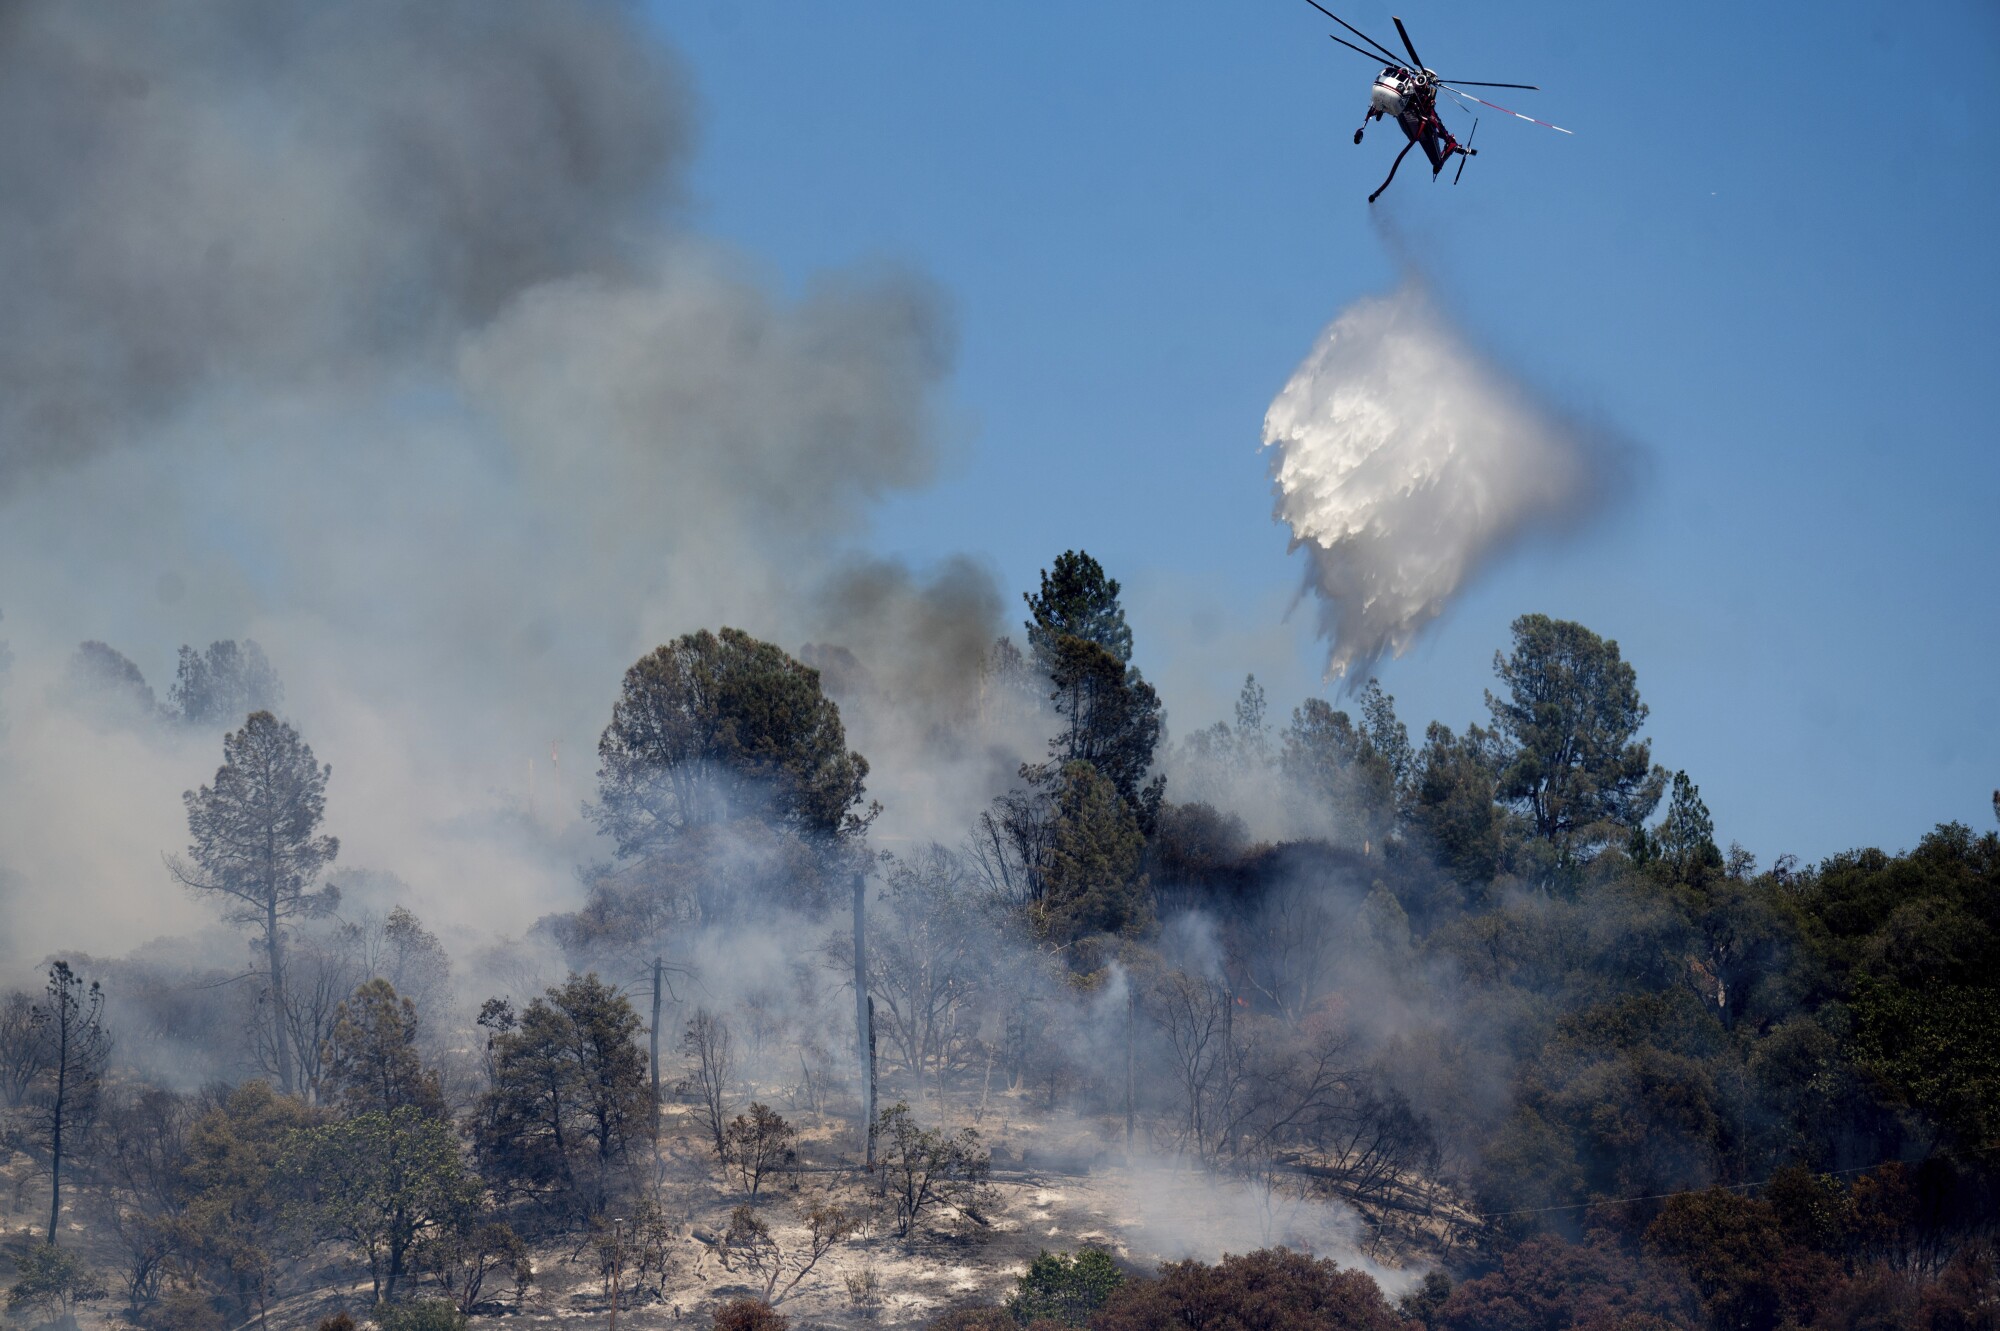 A helicopter drops water on the wildfire.